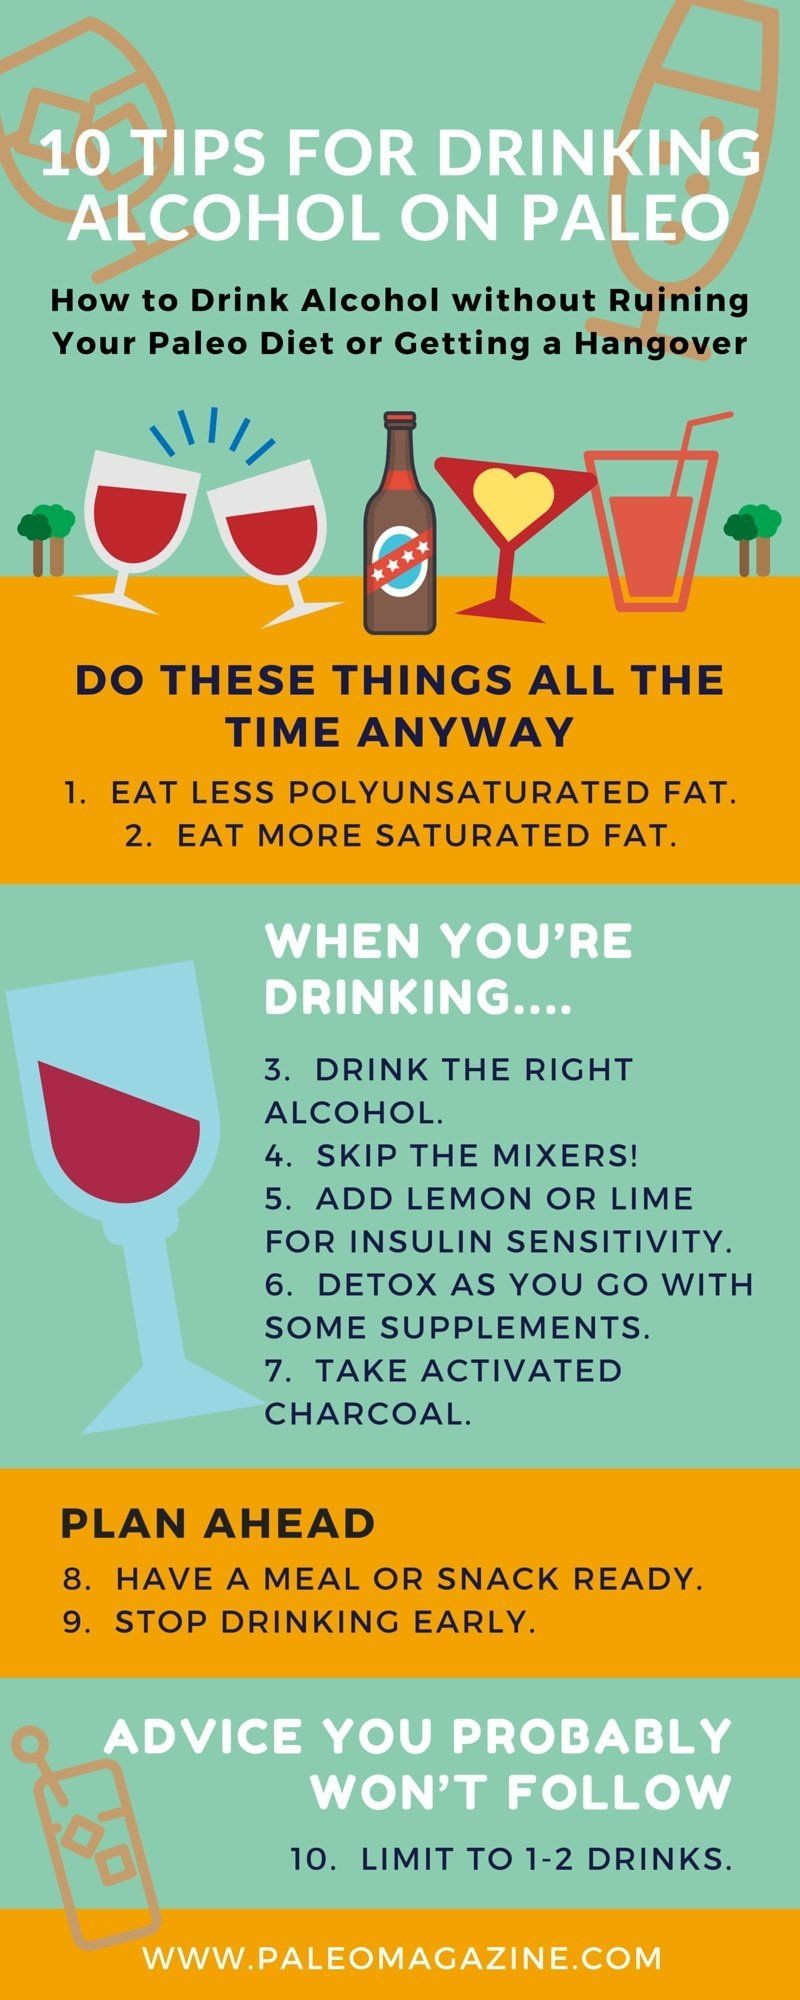 Paleo Diet Alcohol
 How To Drink Alcohol Without Ruining Your Paleo Diet